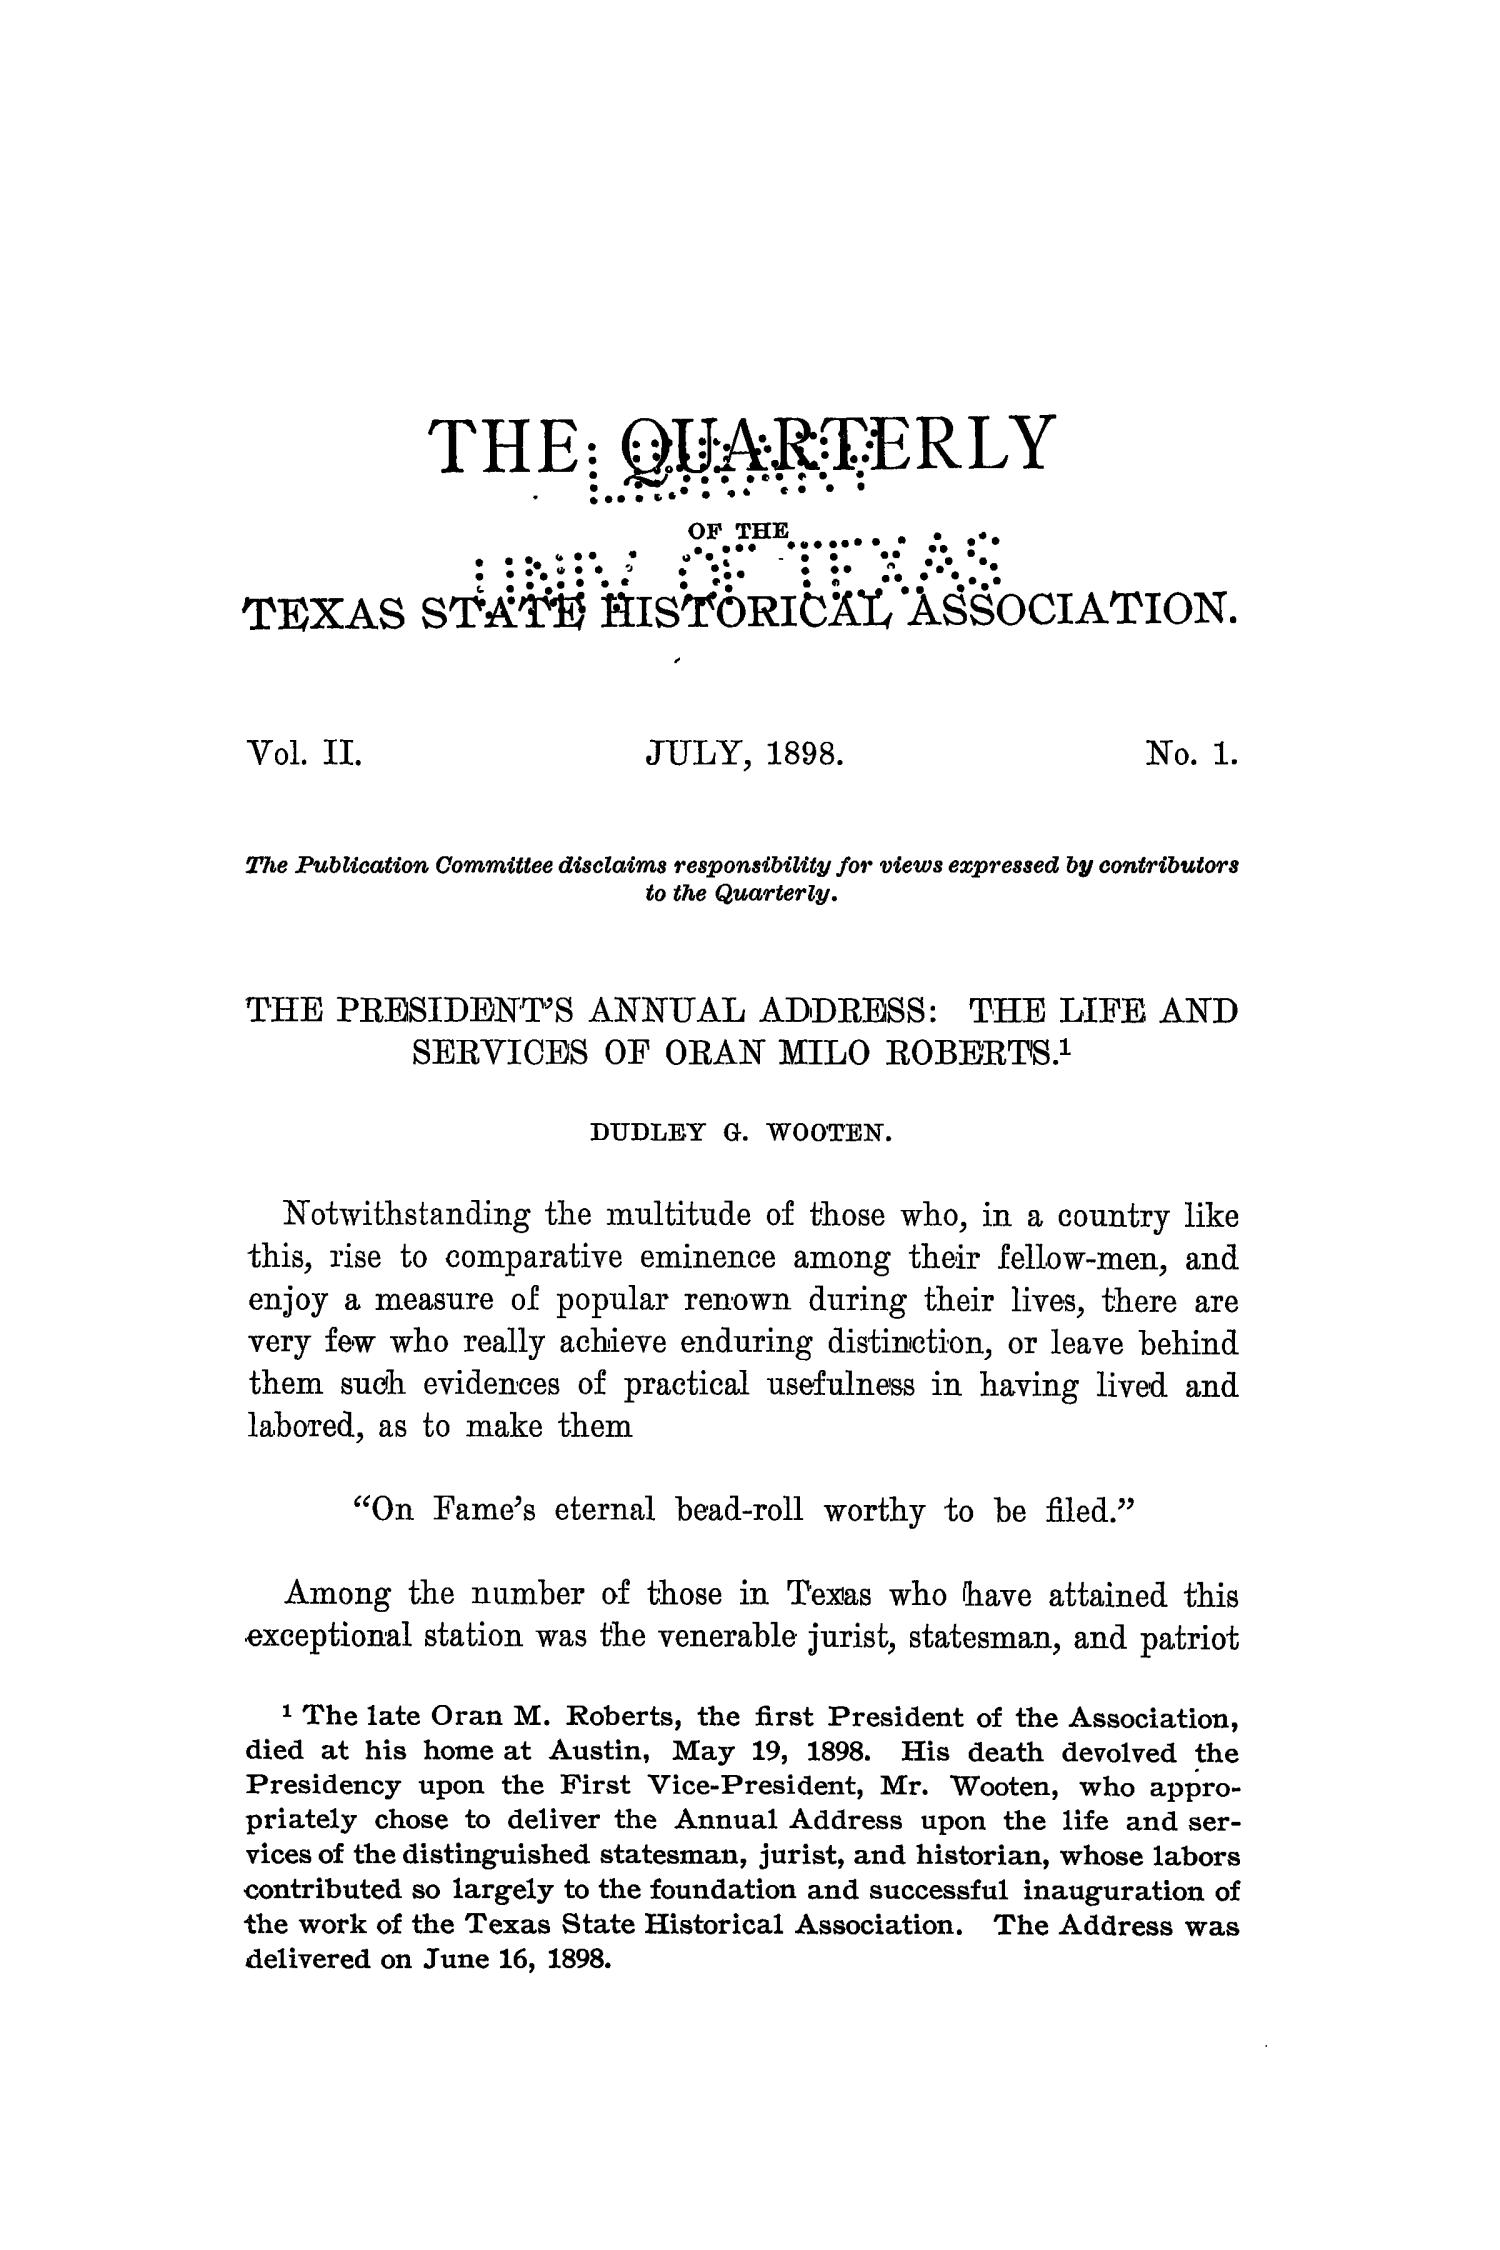 The Quarterly of the Texas State Historical Association, Volume 2, July 1898 - April, 1899
                                                
                                                    1
                                                